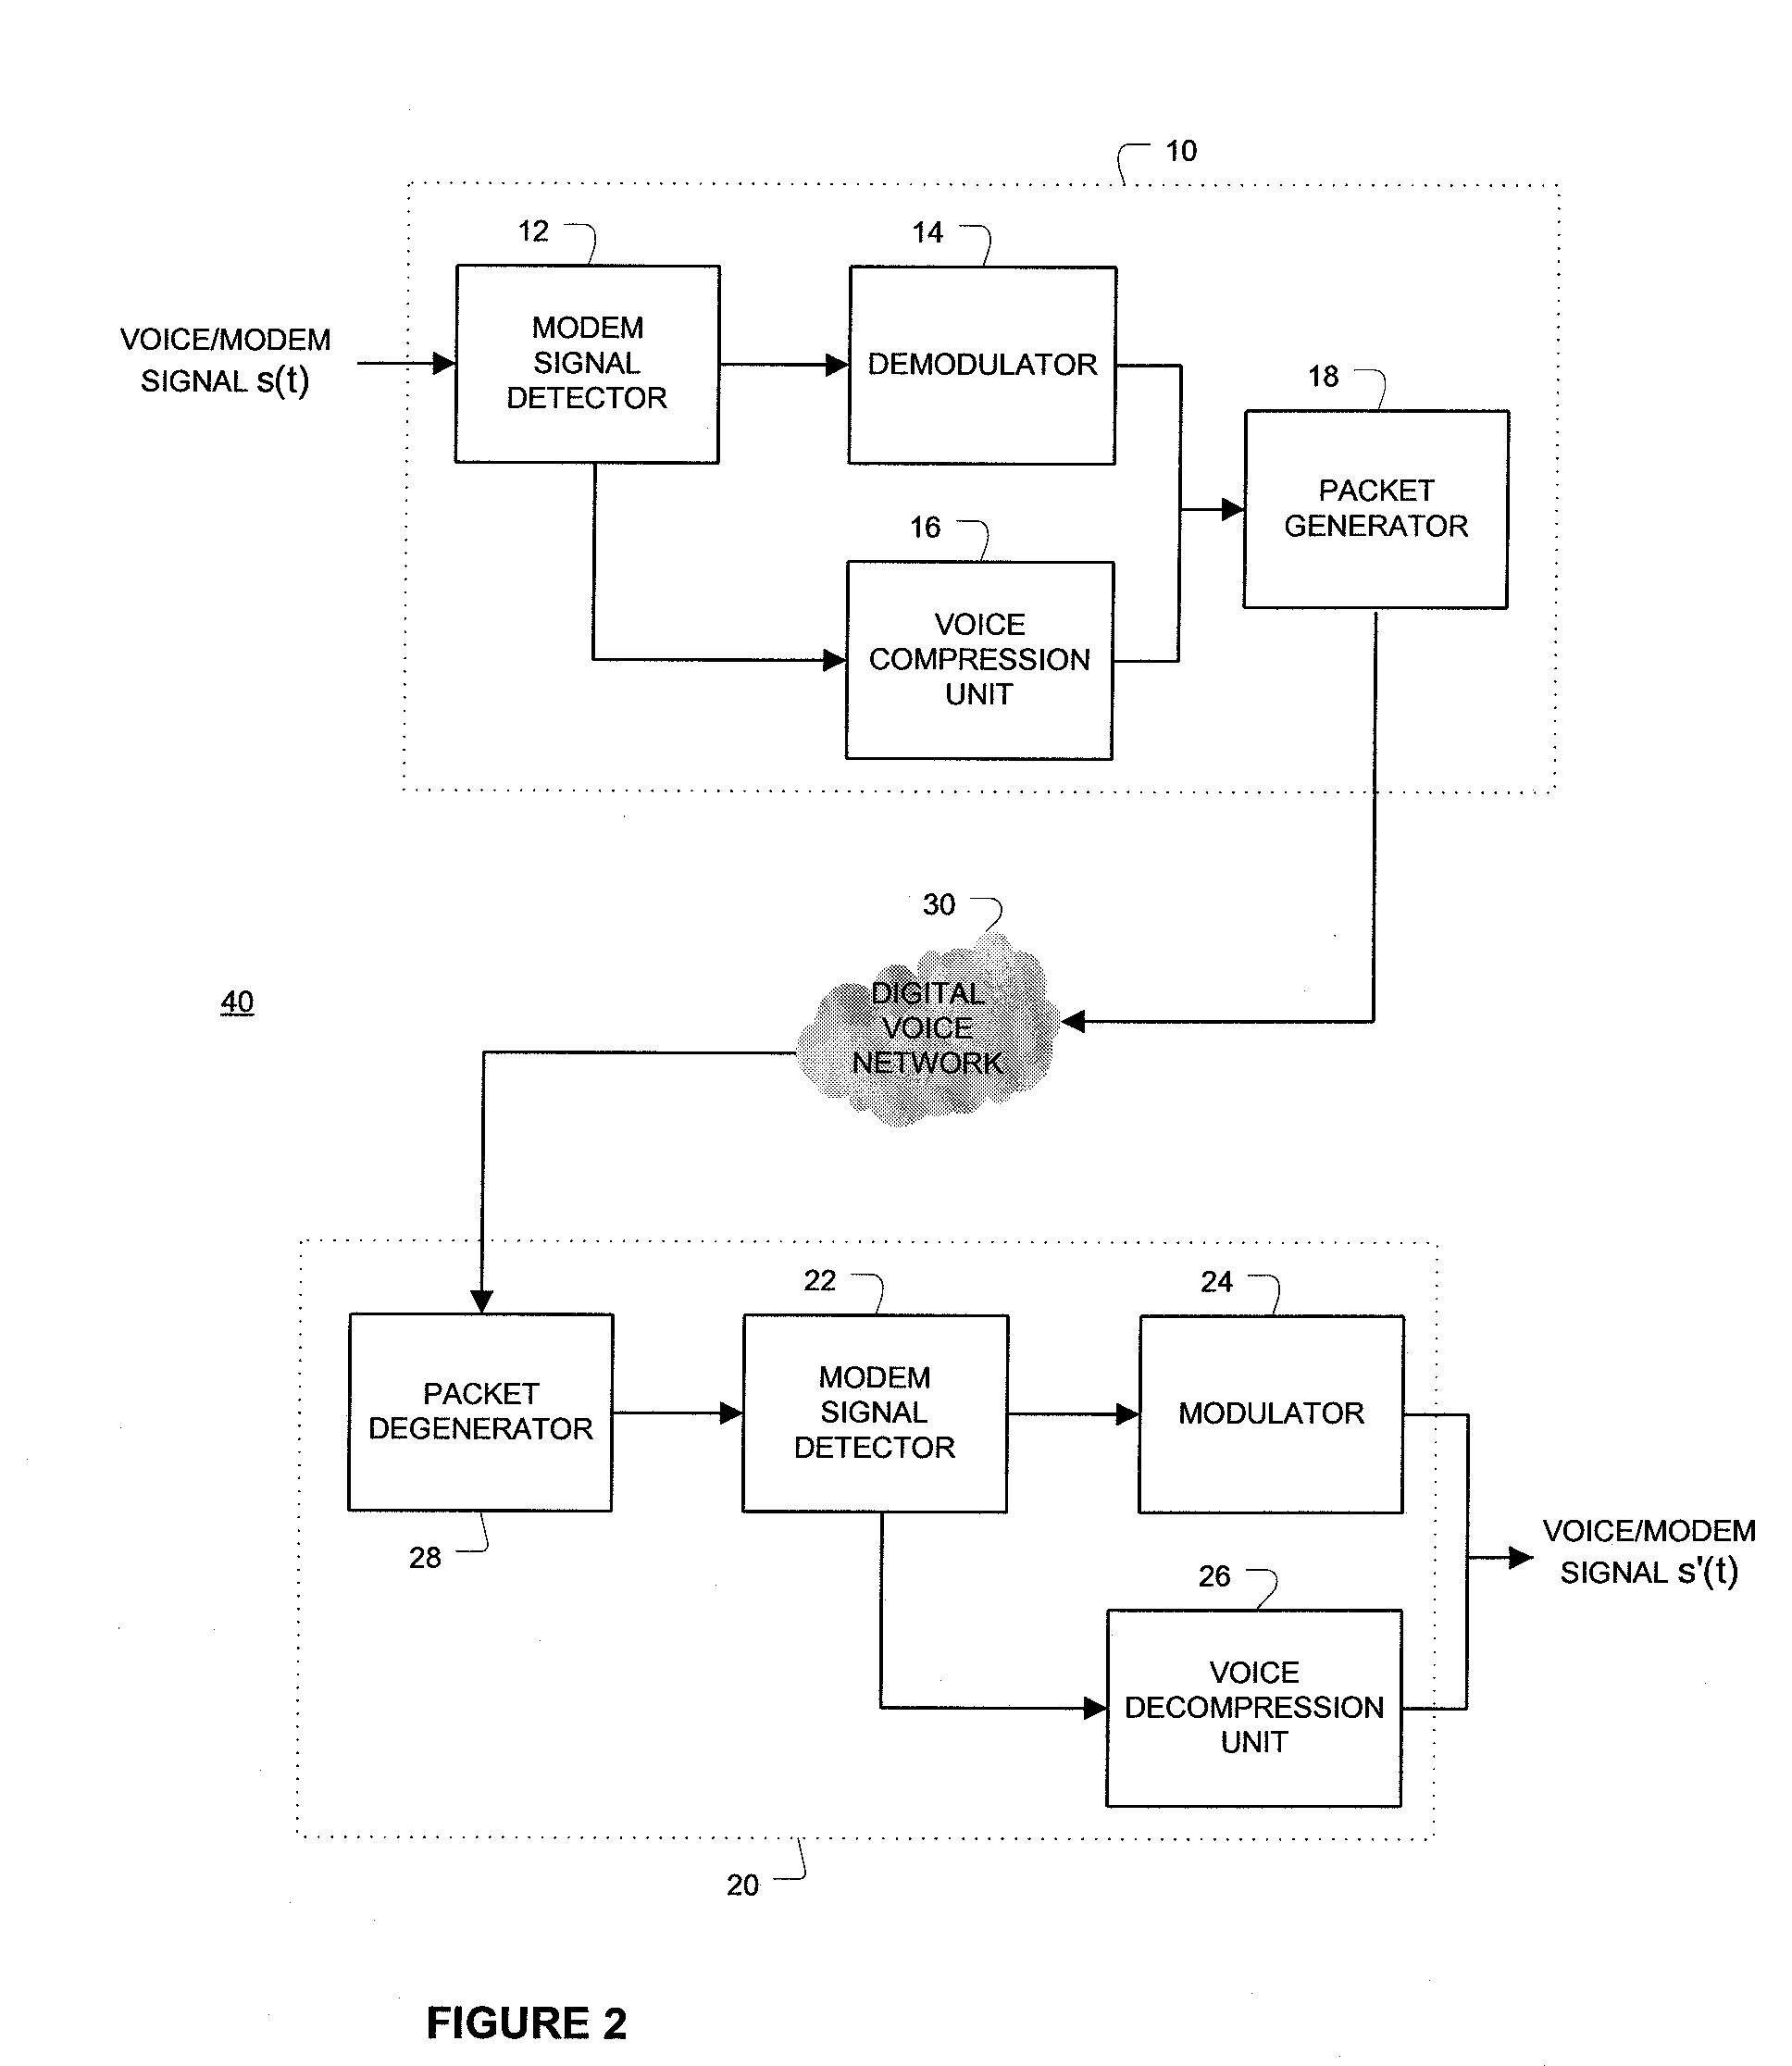 Method and apparatus for coding modem signals for transmission over voice networks